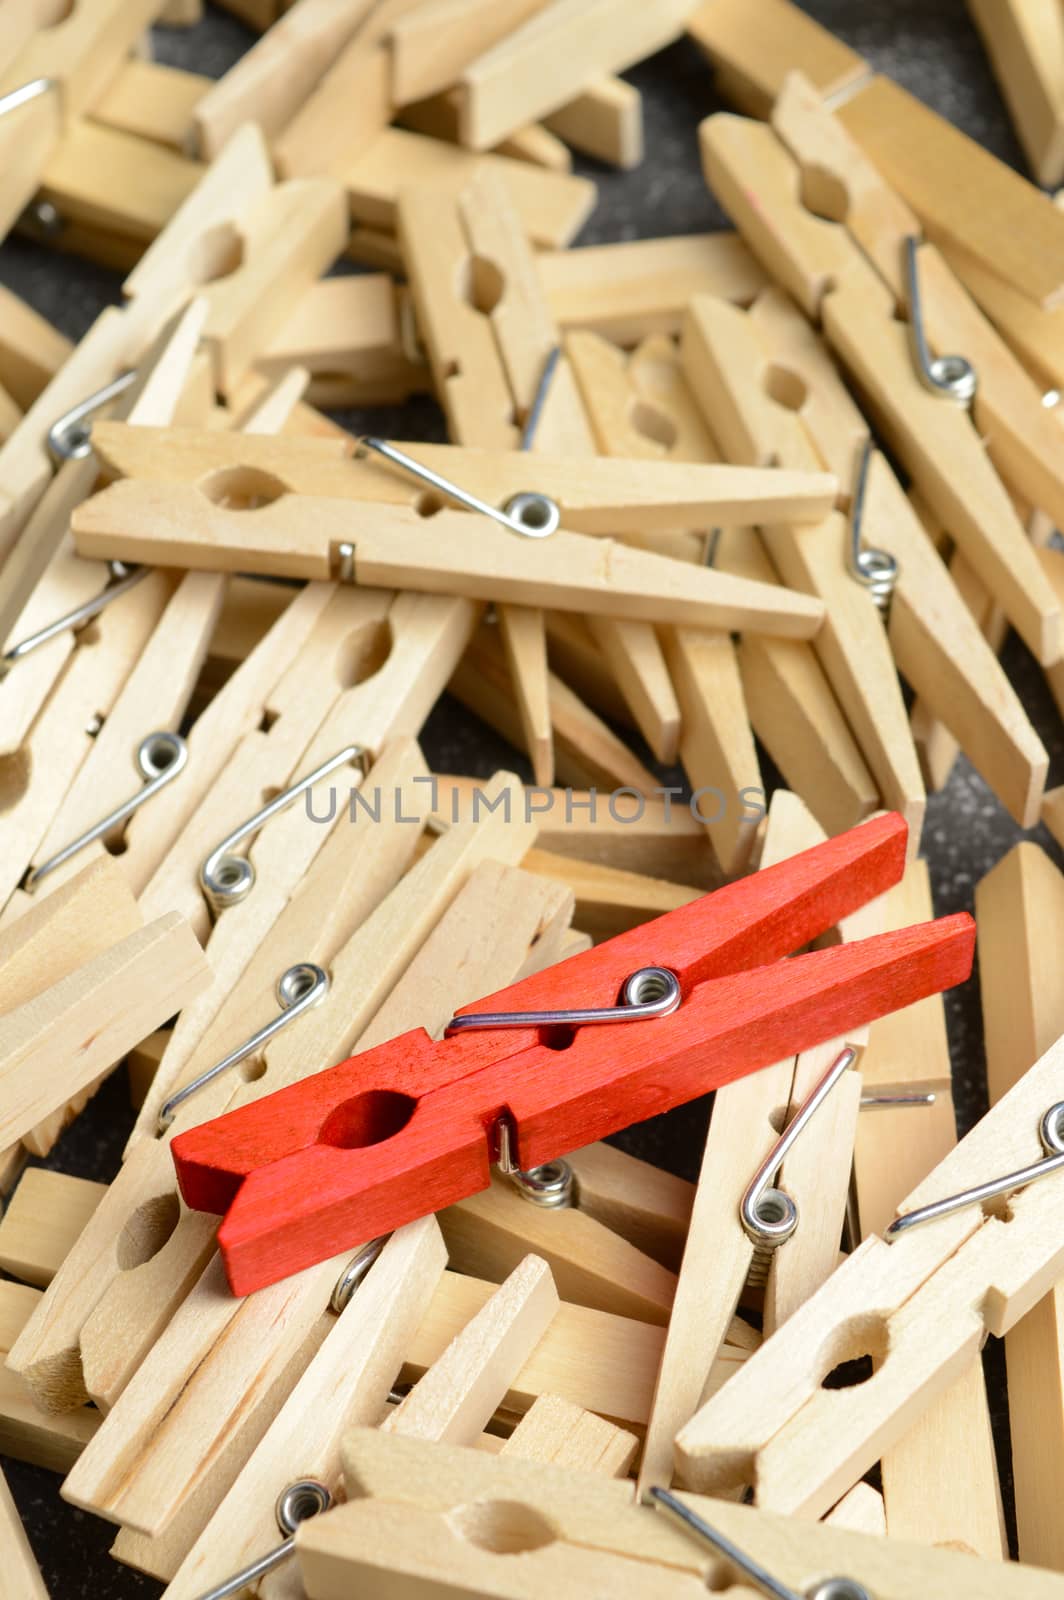 A unique red clothespin stands out from the rest.